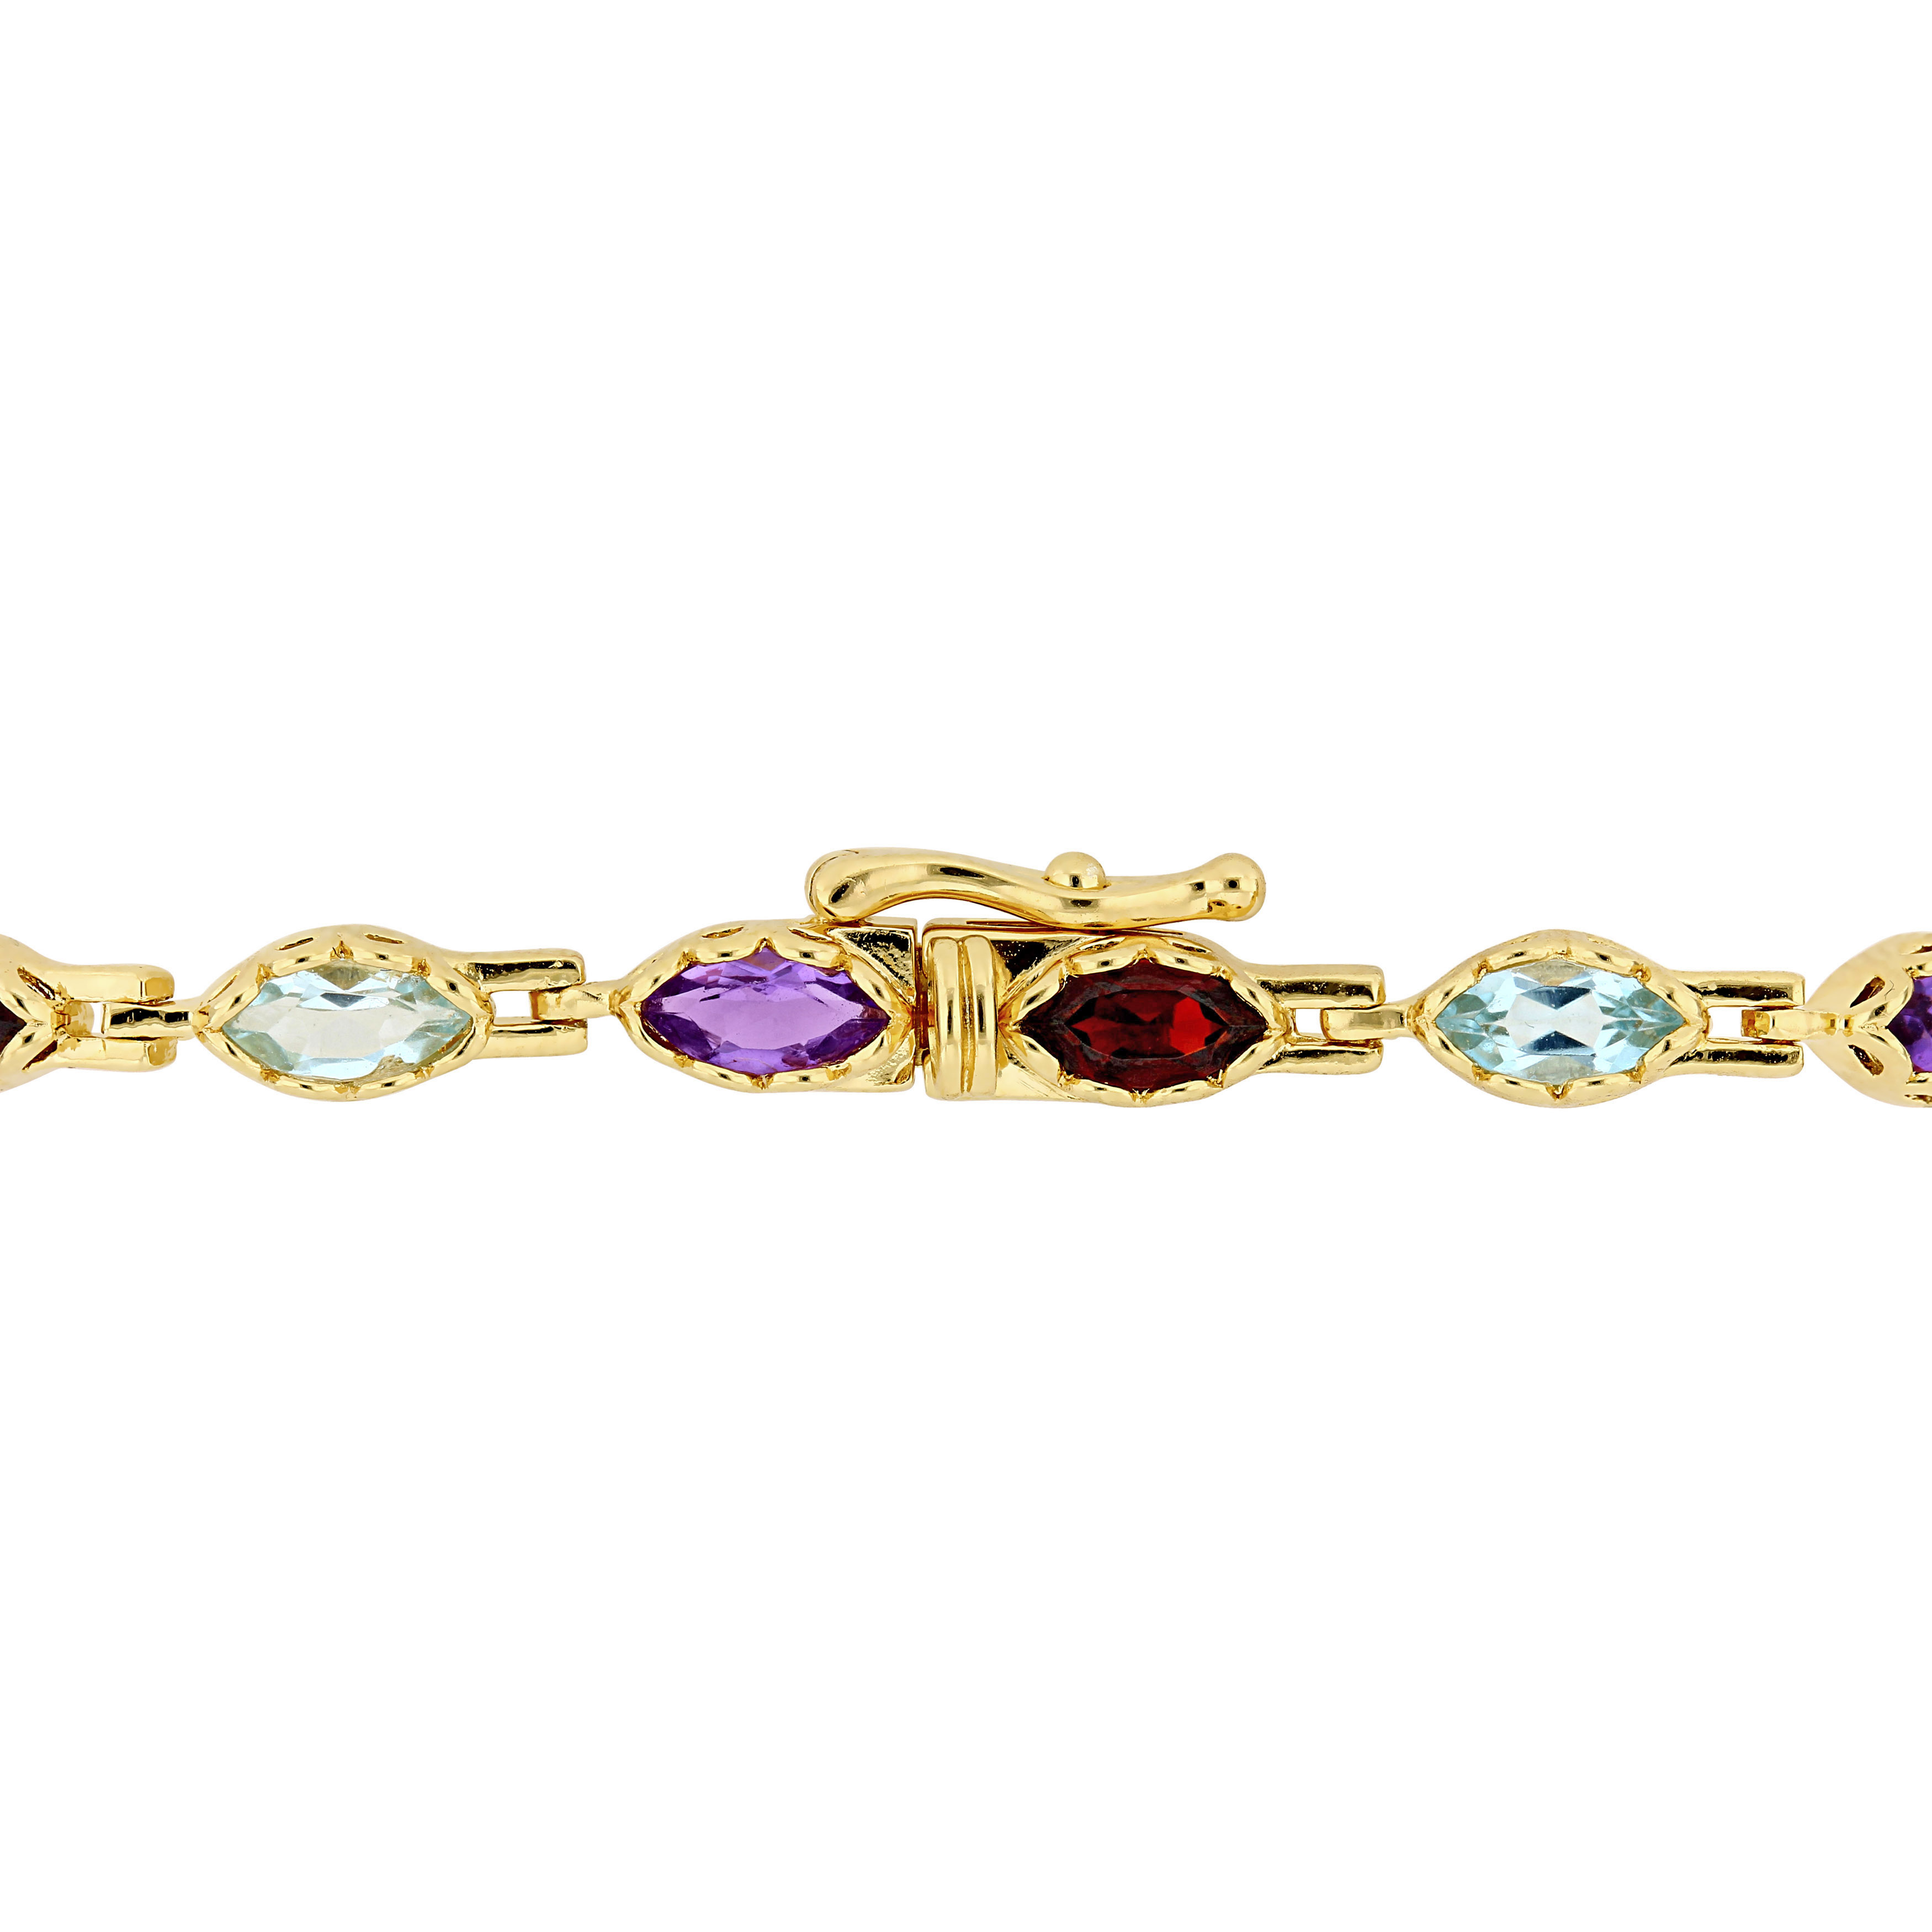 4 1/2 CT TGW Multi-Gemstone Marquise Bracelet in Yellow Plated Sterling Silver